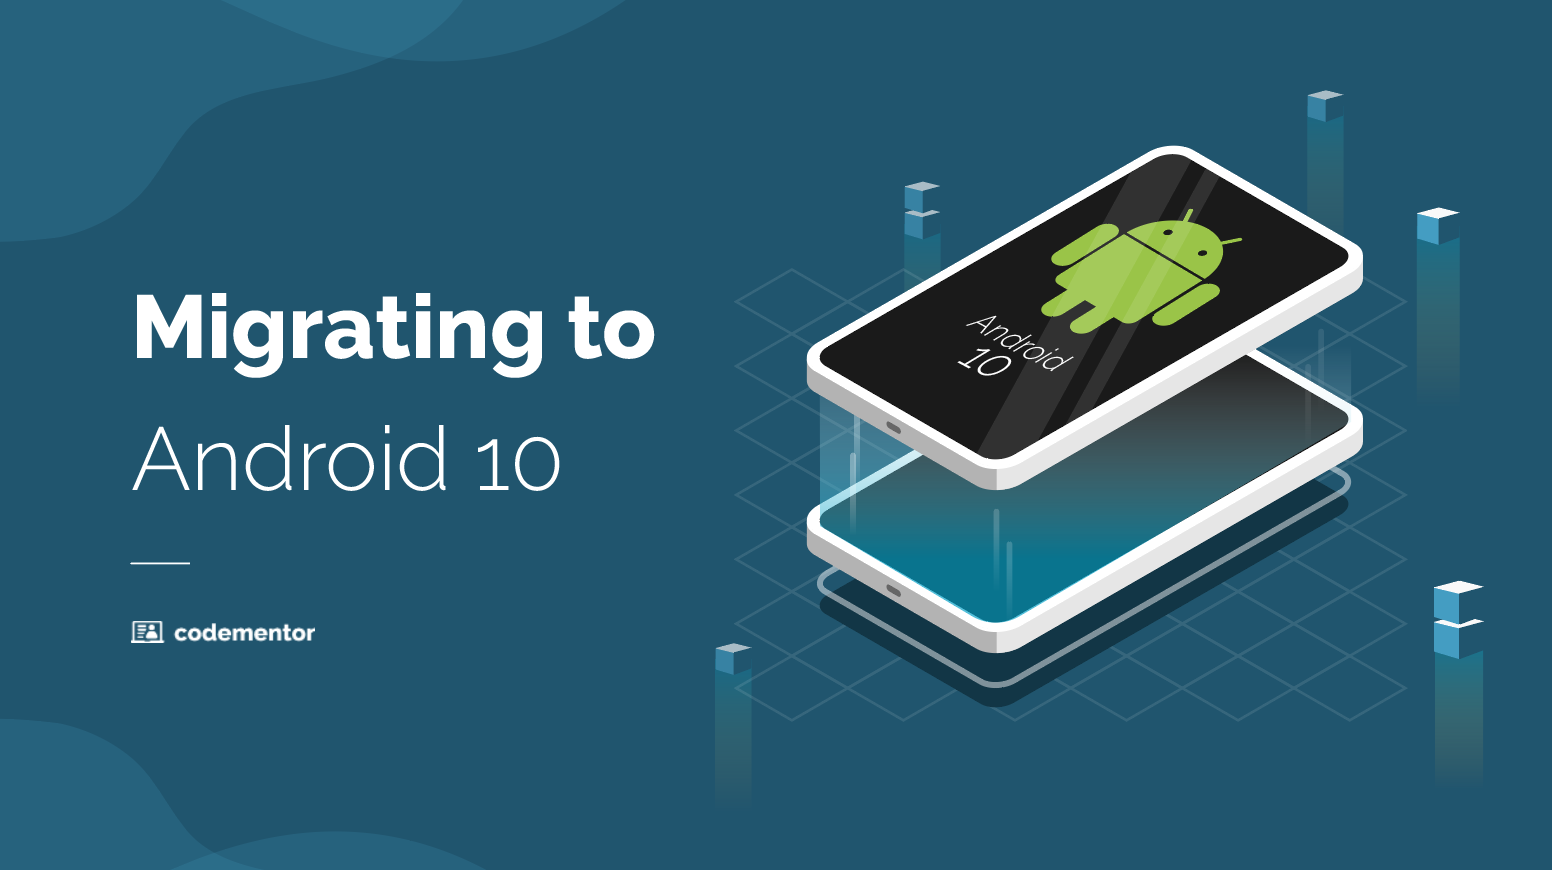 Migrating to Android 10: When You've Had Too Much Dessert